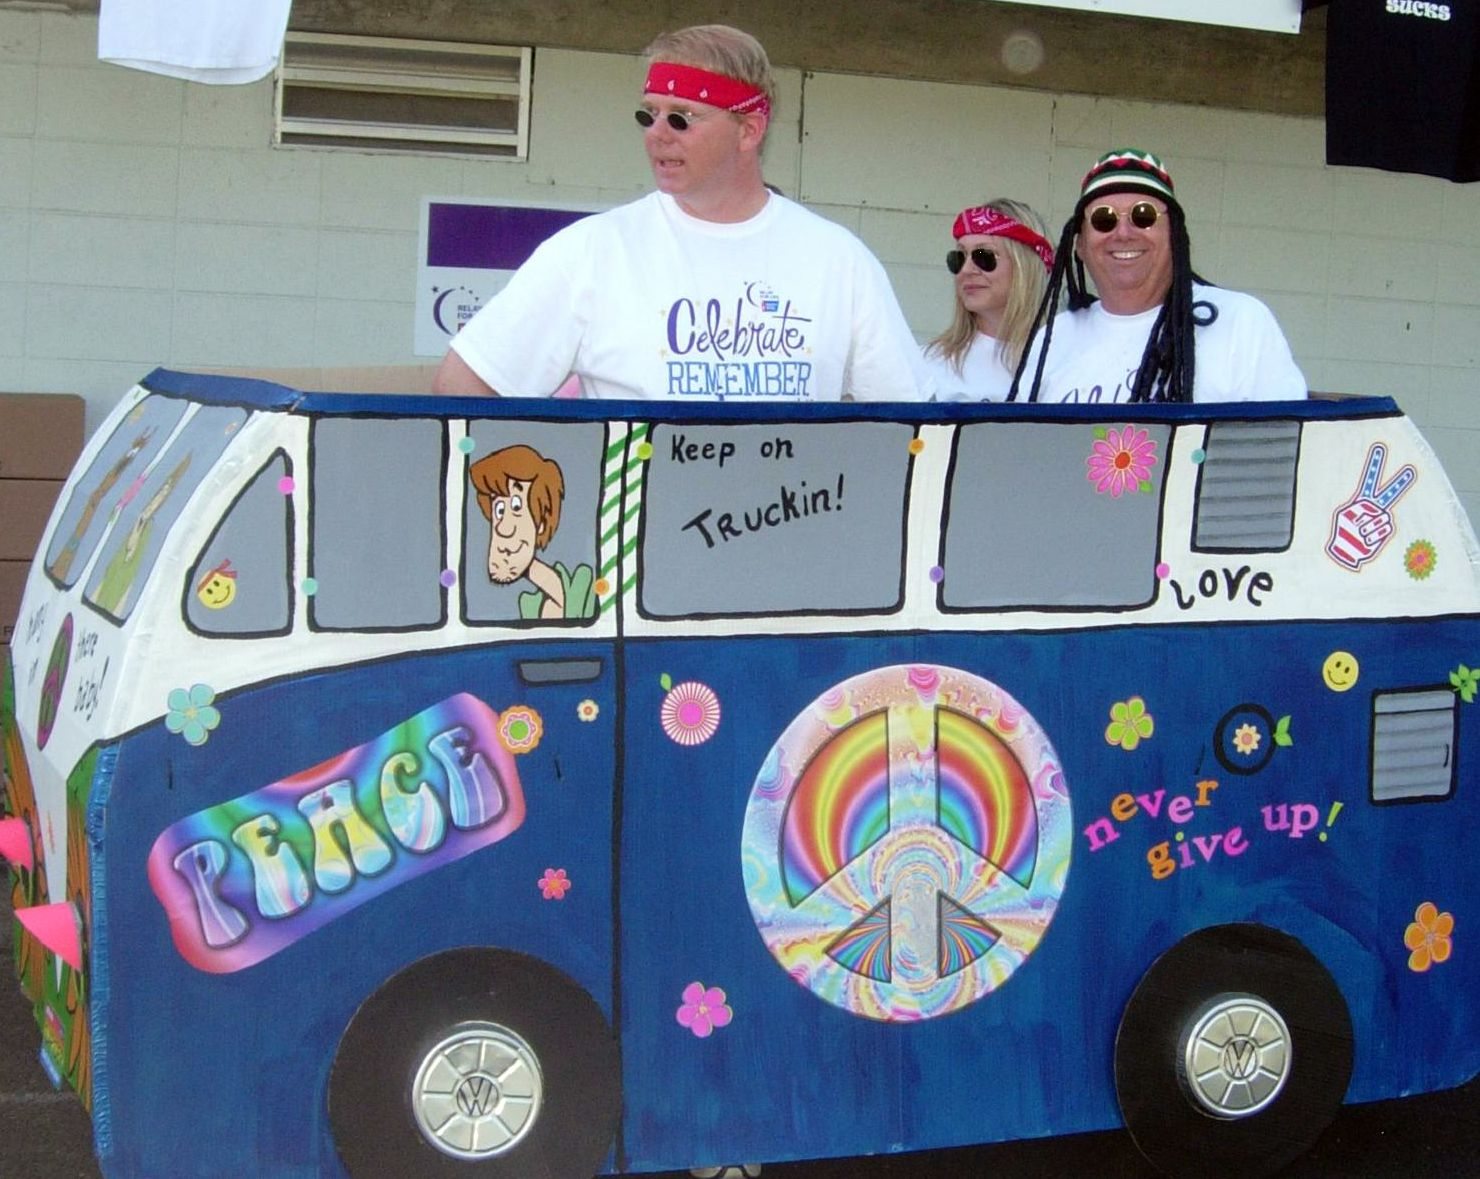 The Battle for a Cure team took first place in the Cardboard Car Lap at the Battle Ground Relay for Life.